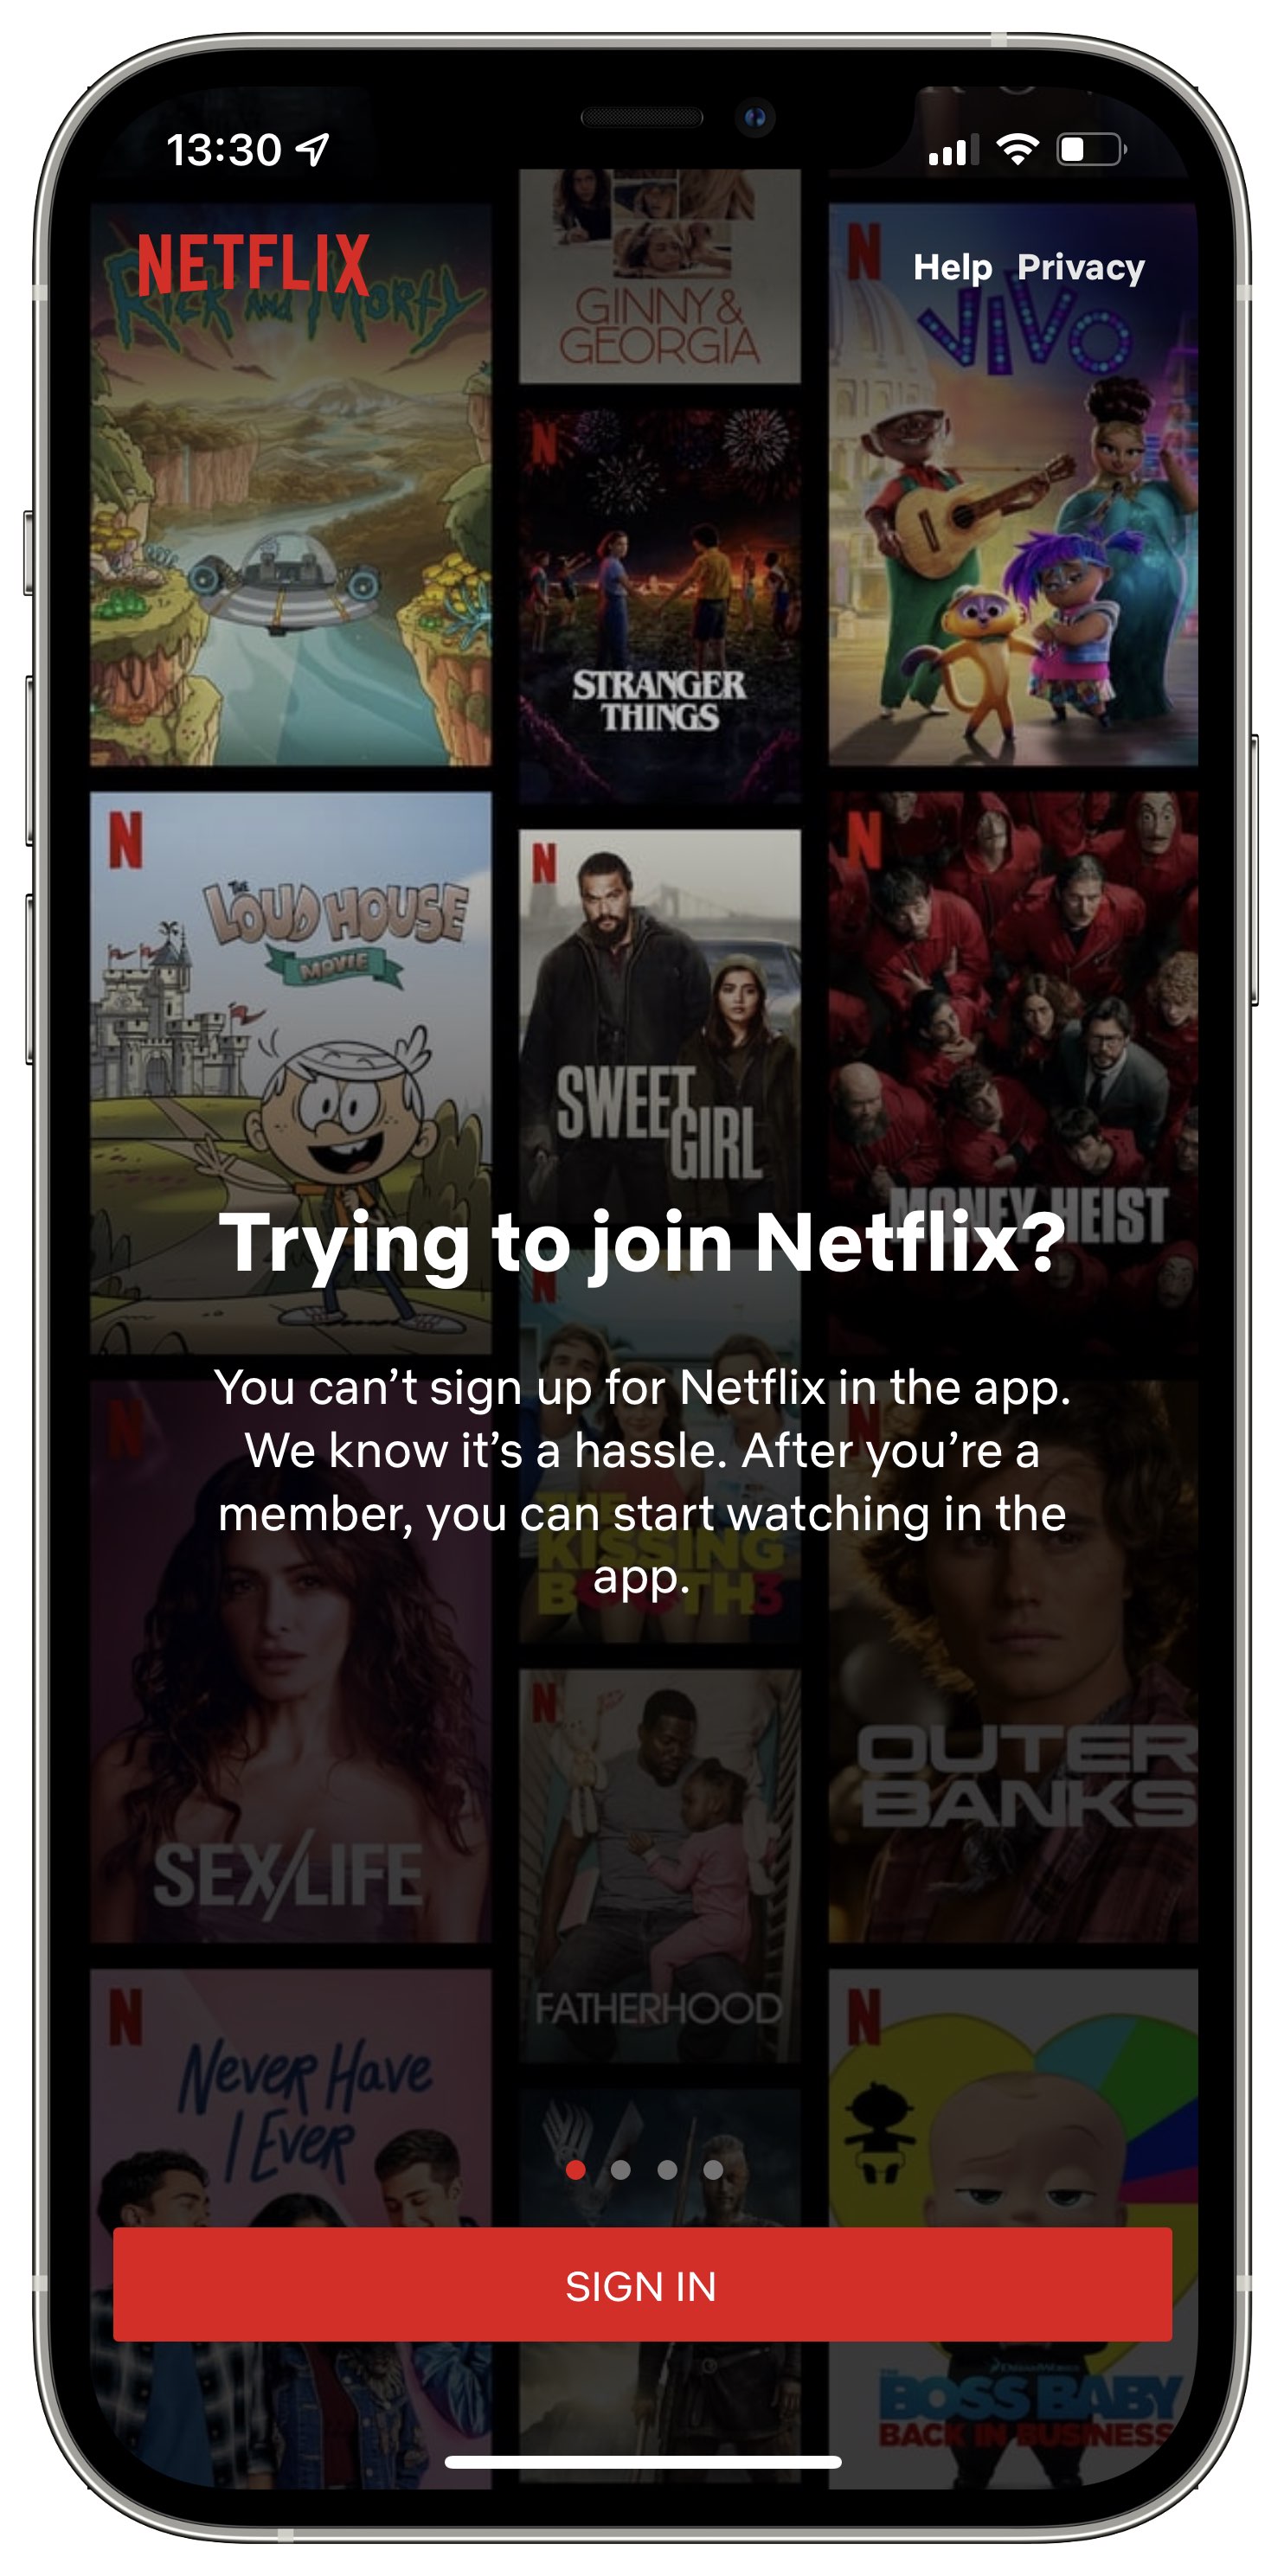 iPhone screenshot showing a message in the Netflix app instructing people to sing up elsewhere